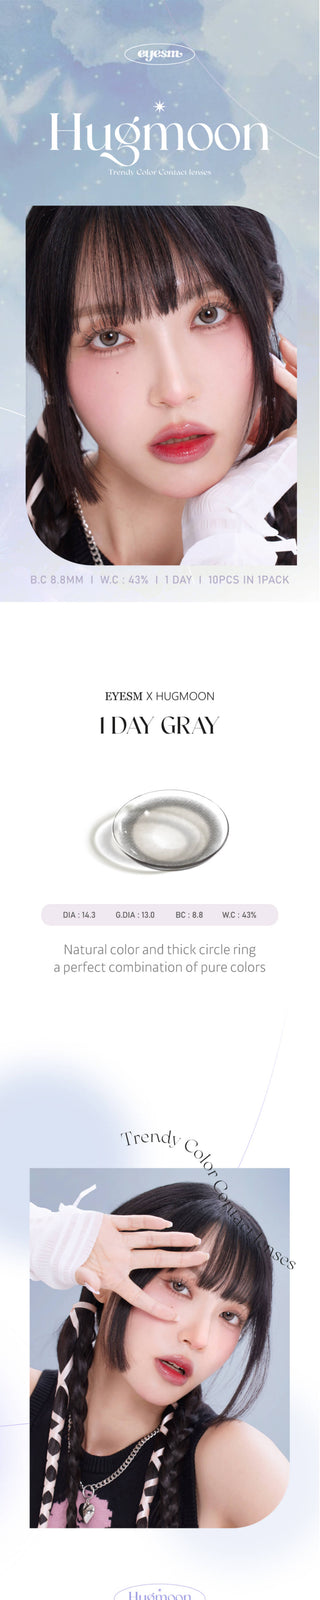 The Eyesm Hugmoon 1-Day Grey (10pk) contact lens hue from different perspectives on a model. different close-ups of eyes with the colour lens, displaying the subtle but natural change on dark brown, natural brown, and light brown eyes.